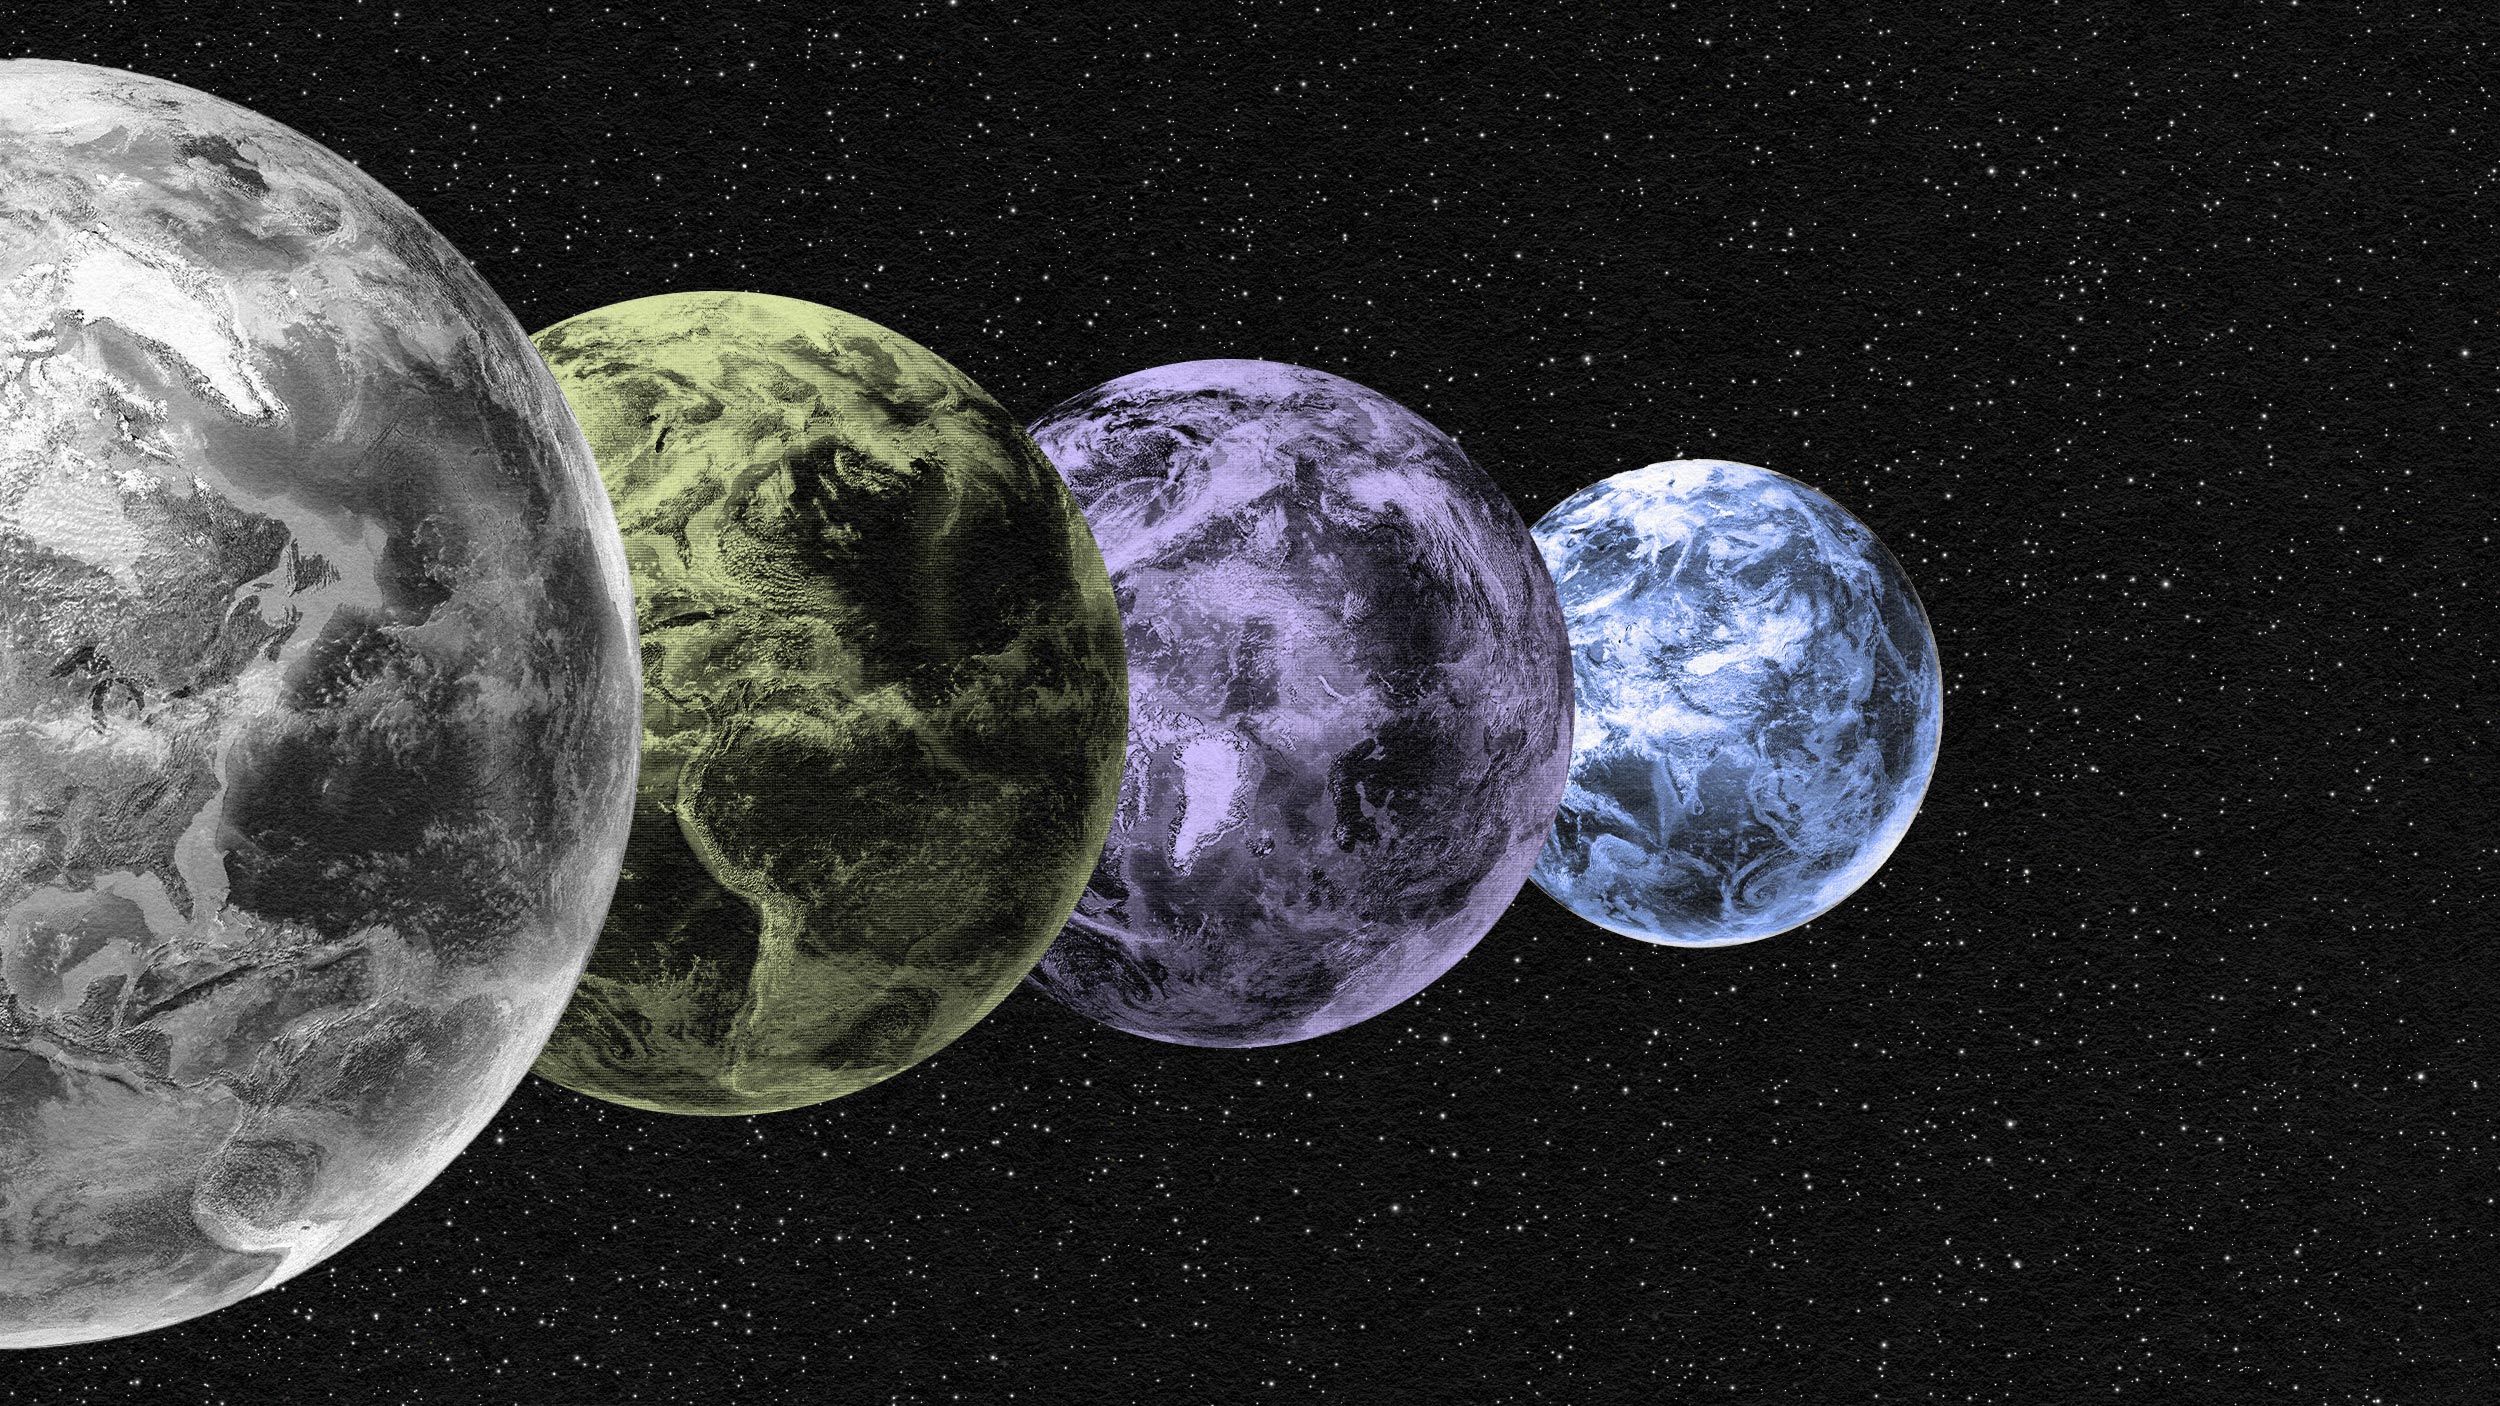 Four earth-like planets from a multiverse, in varying colors, aligned in space against a starry background.